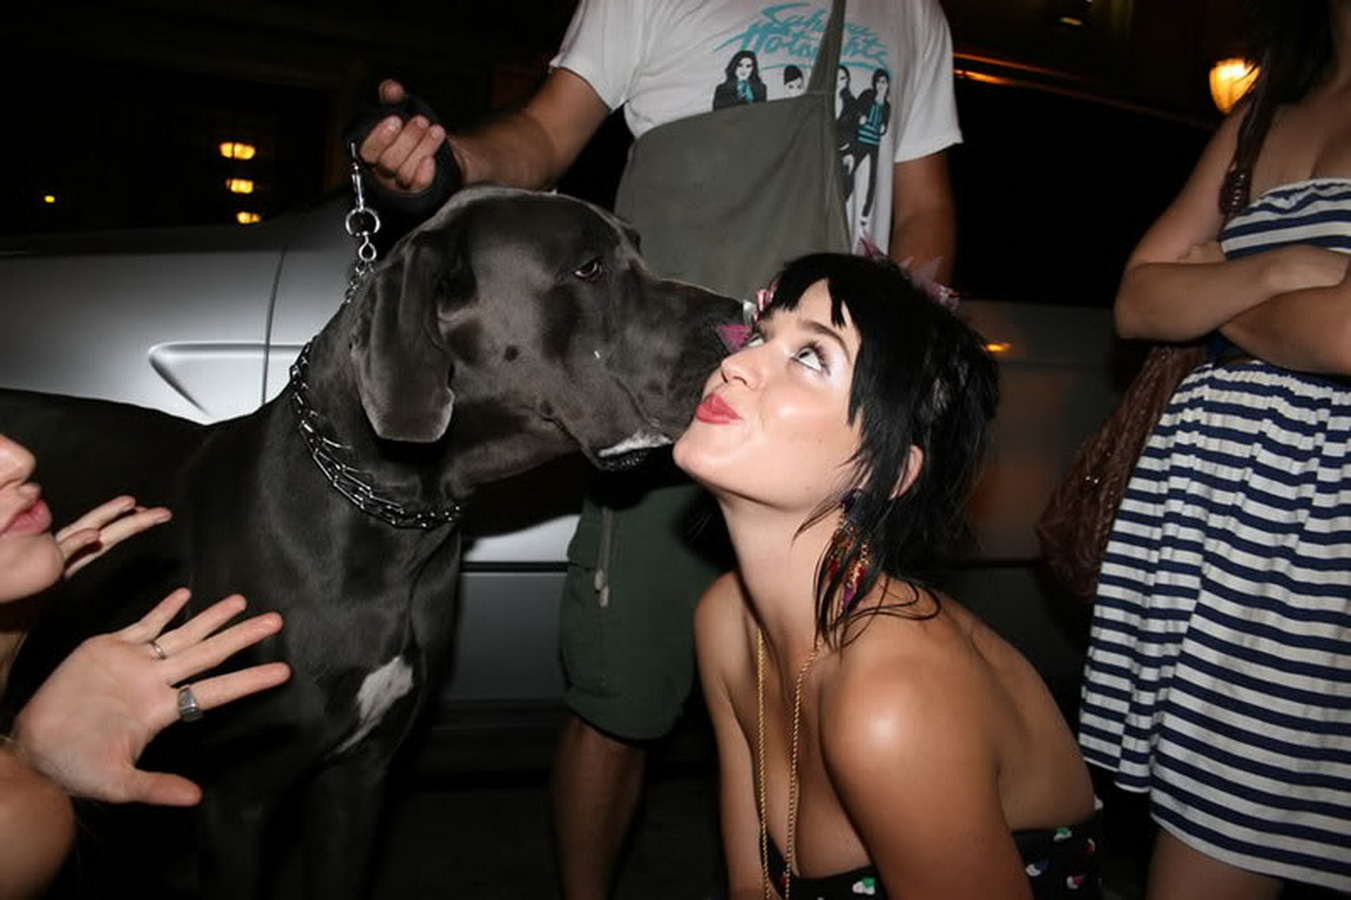 Katy_Perry_bobsslip_drunk_cleavage_downblouse_upskirt_nipslip_at_her_birthday_2007_party_99x_HQ_10.jpg